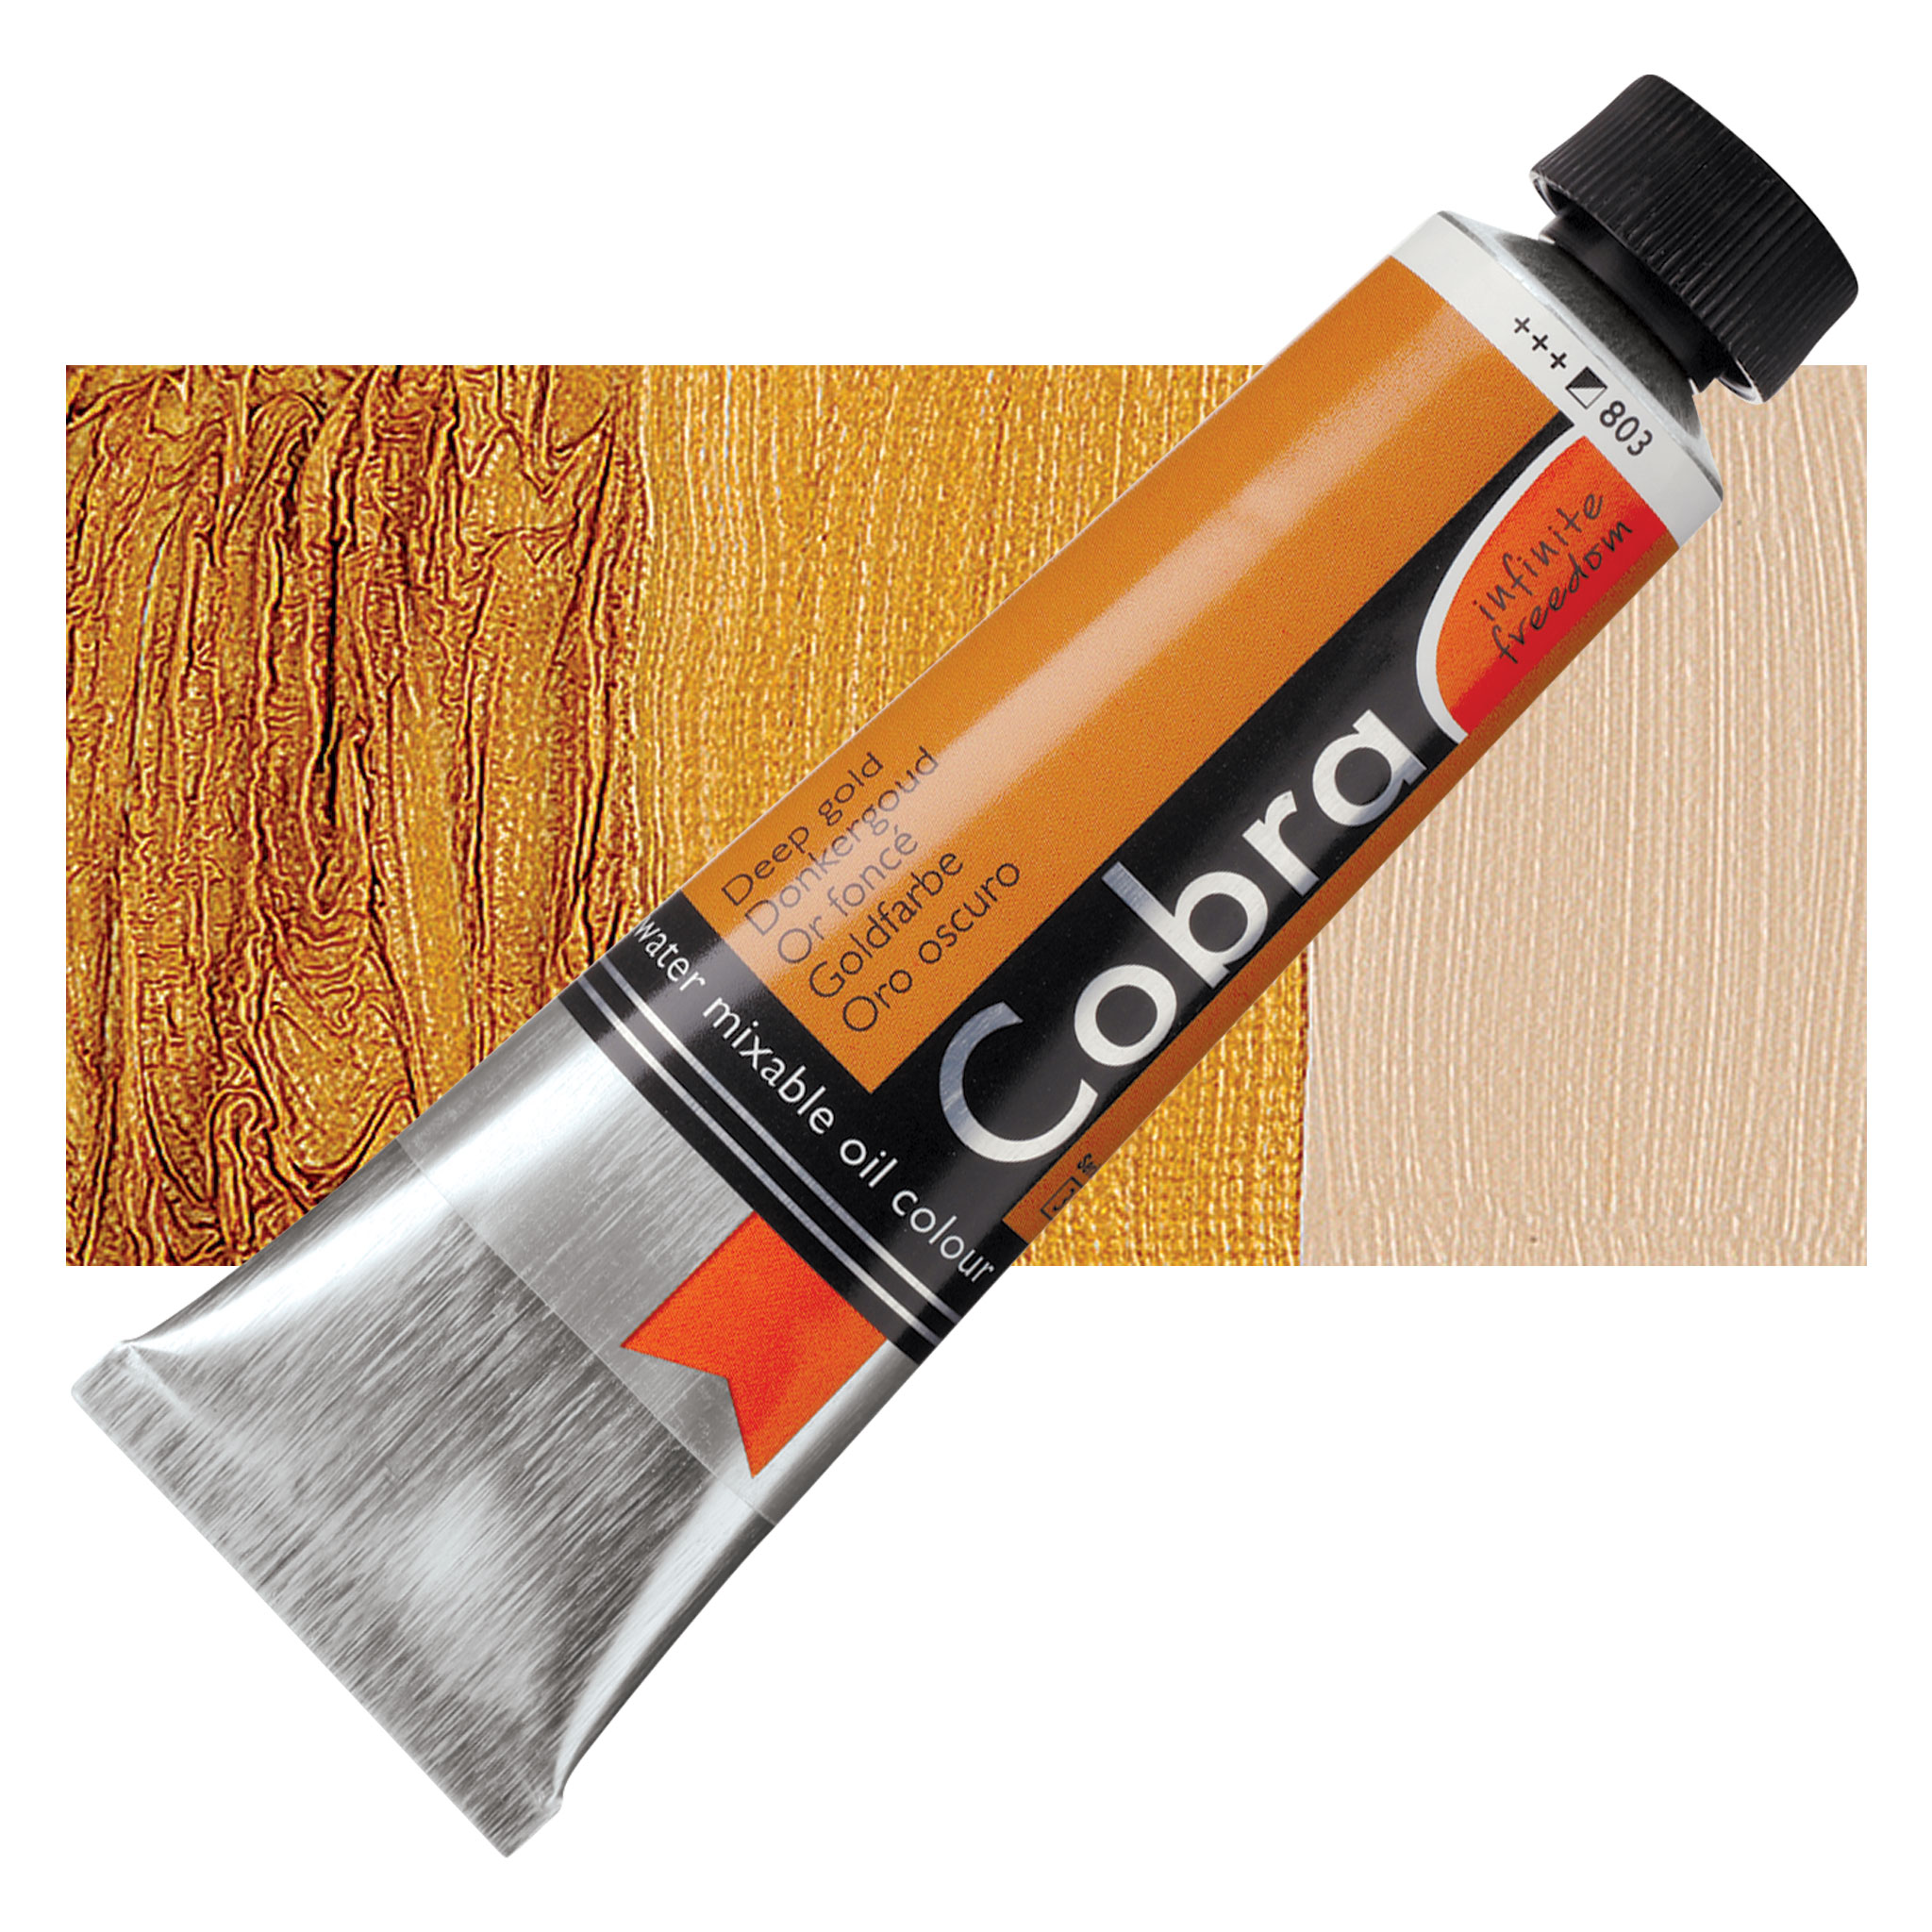 Follow Up on Drying Time of Cobra Water Soluble Oil Paints